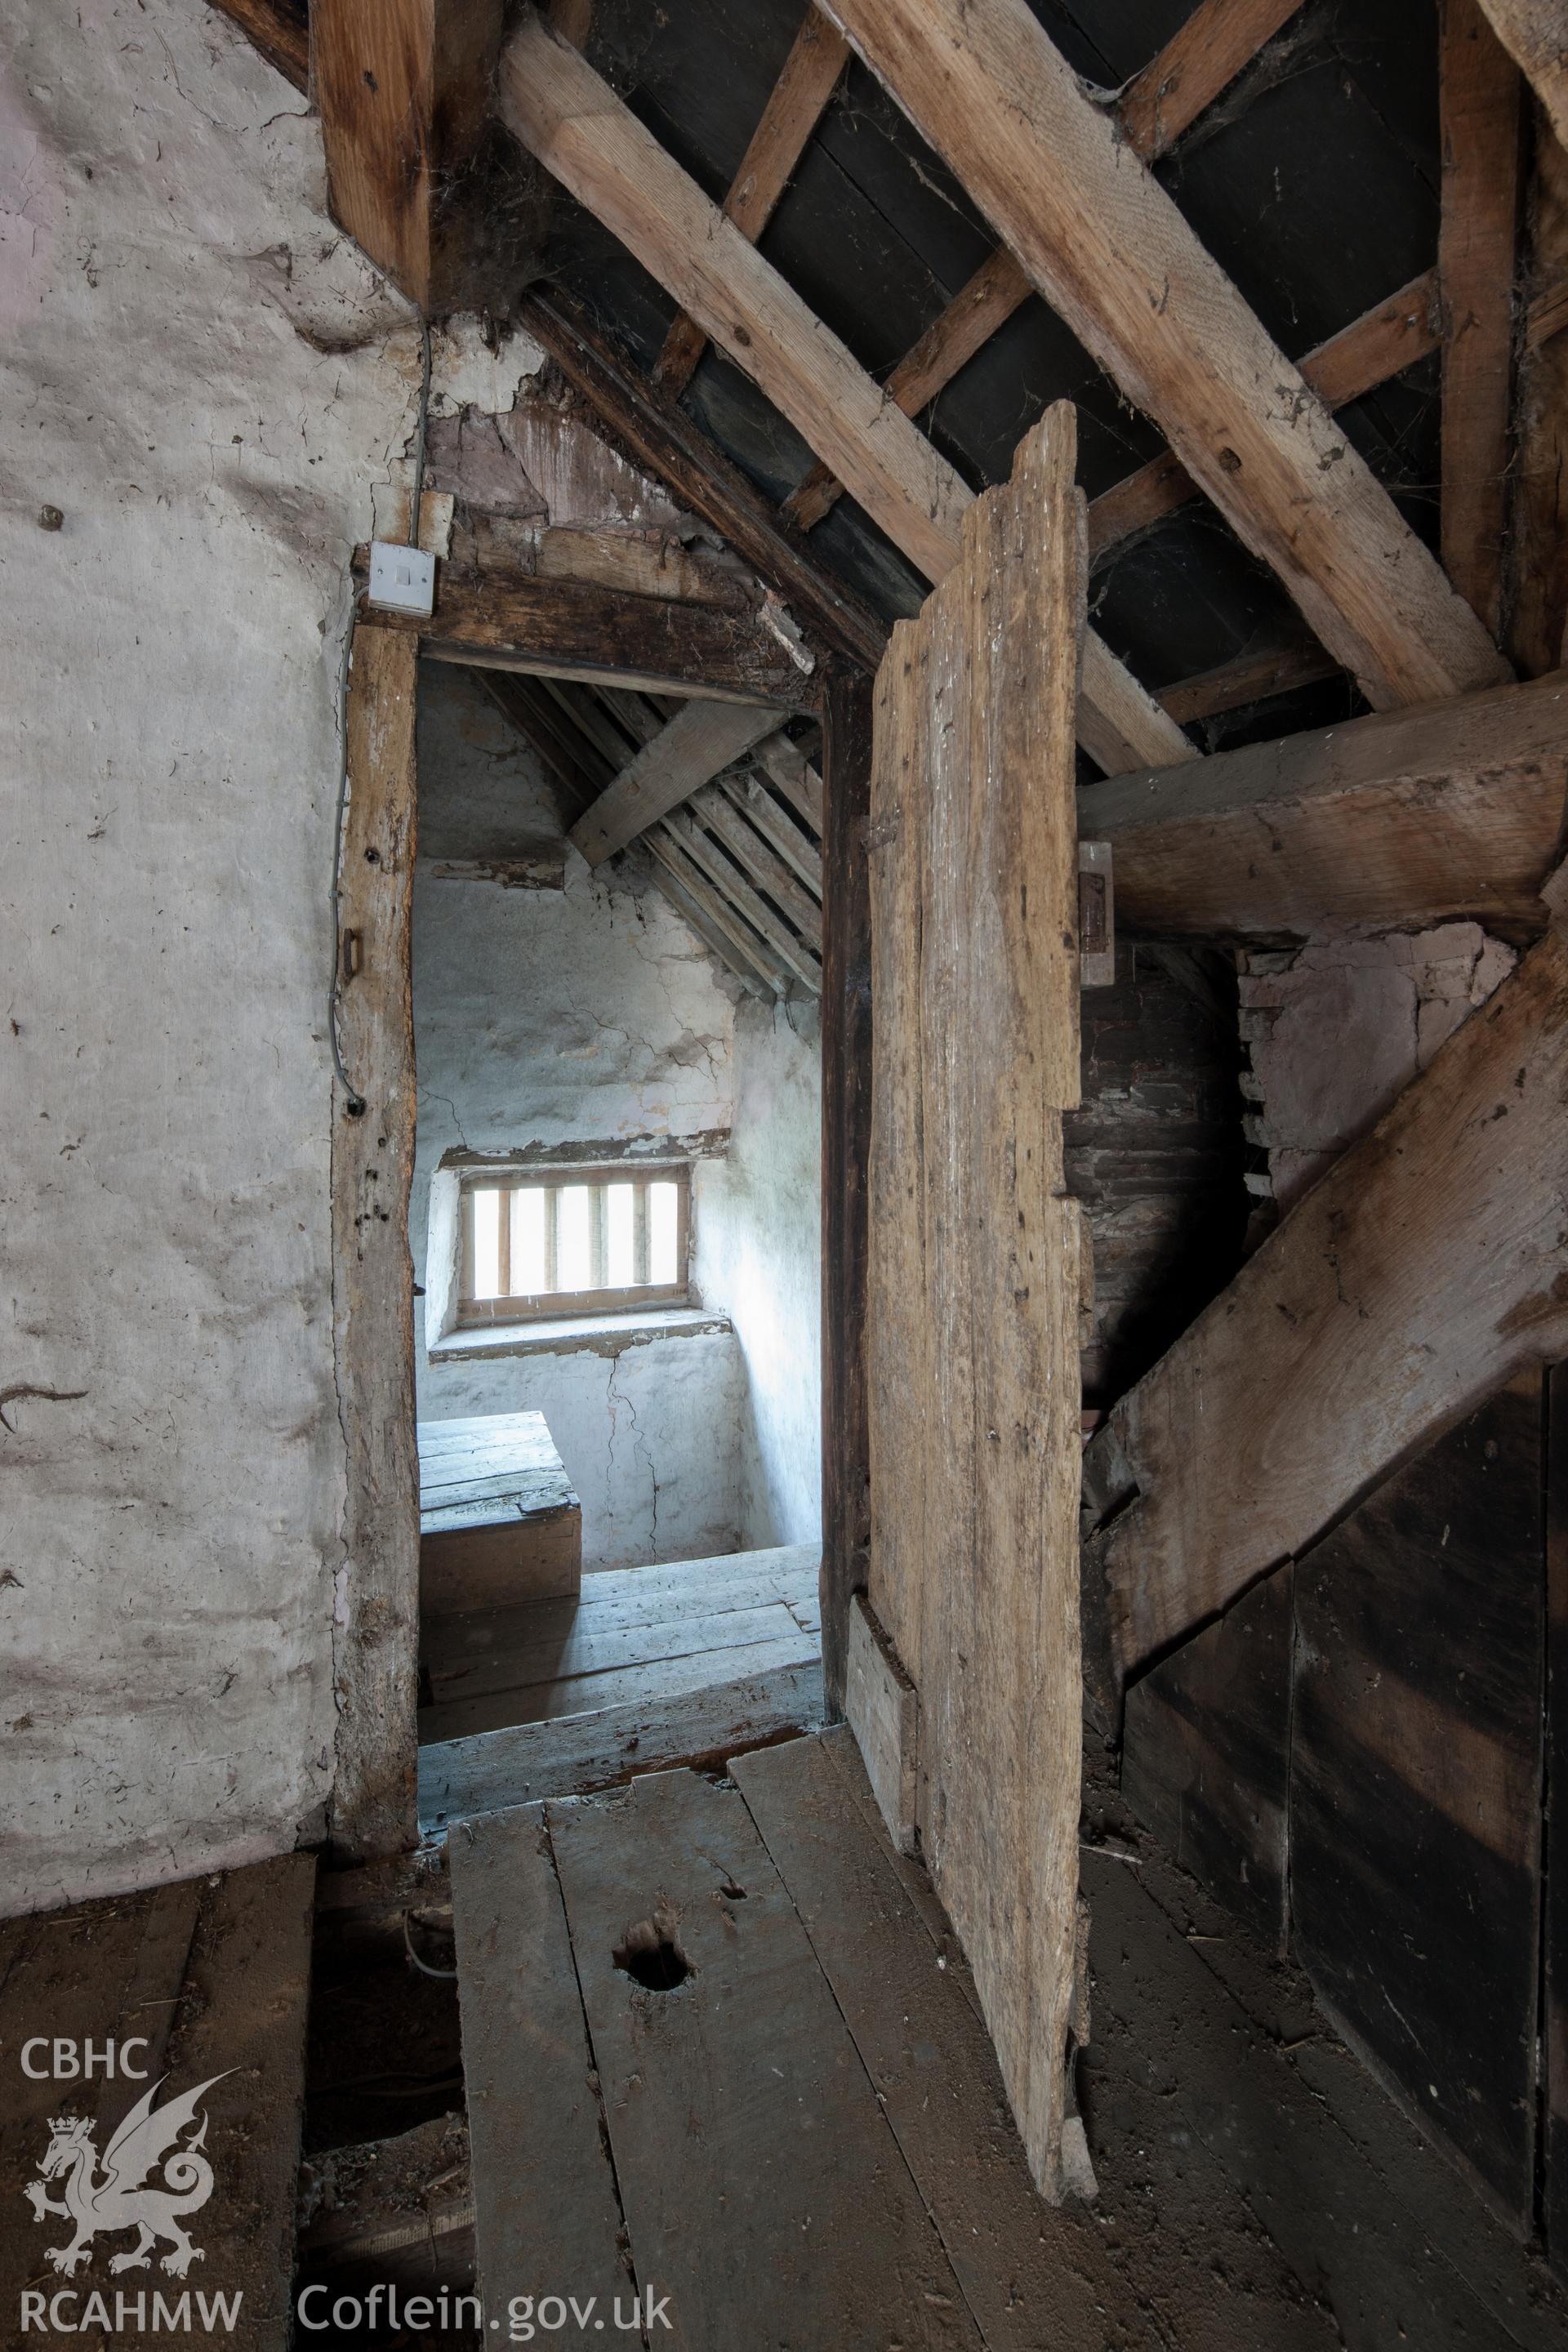 Stair tower entry to attic